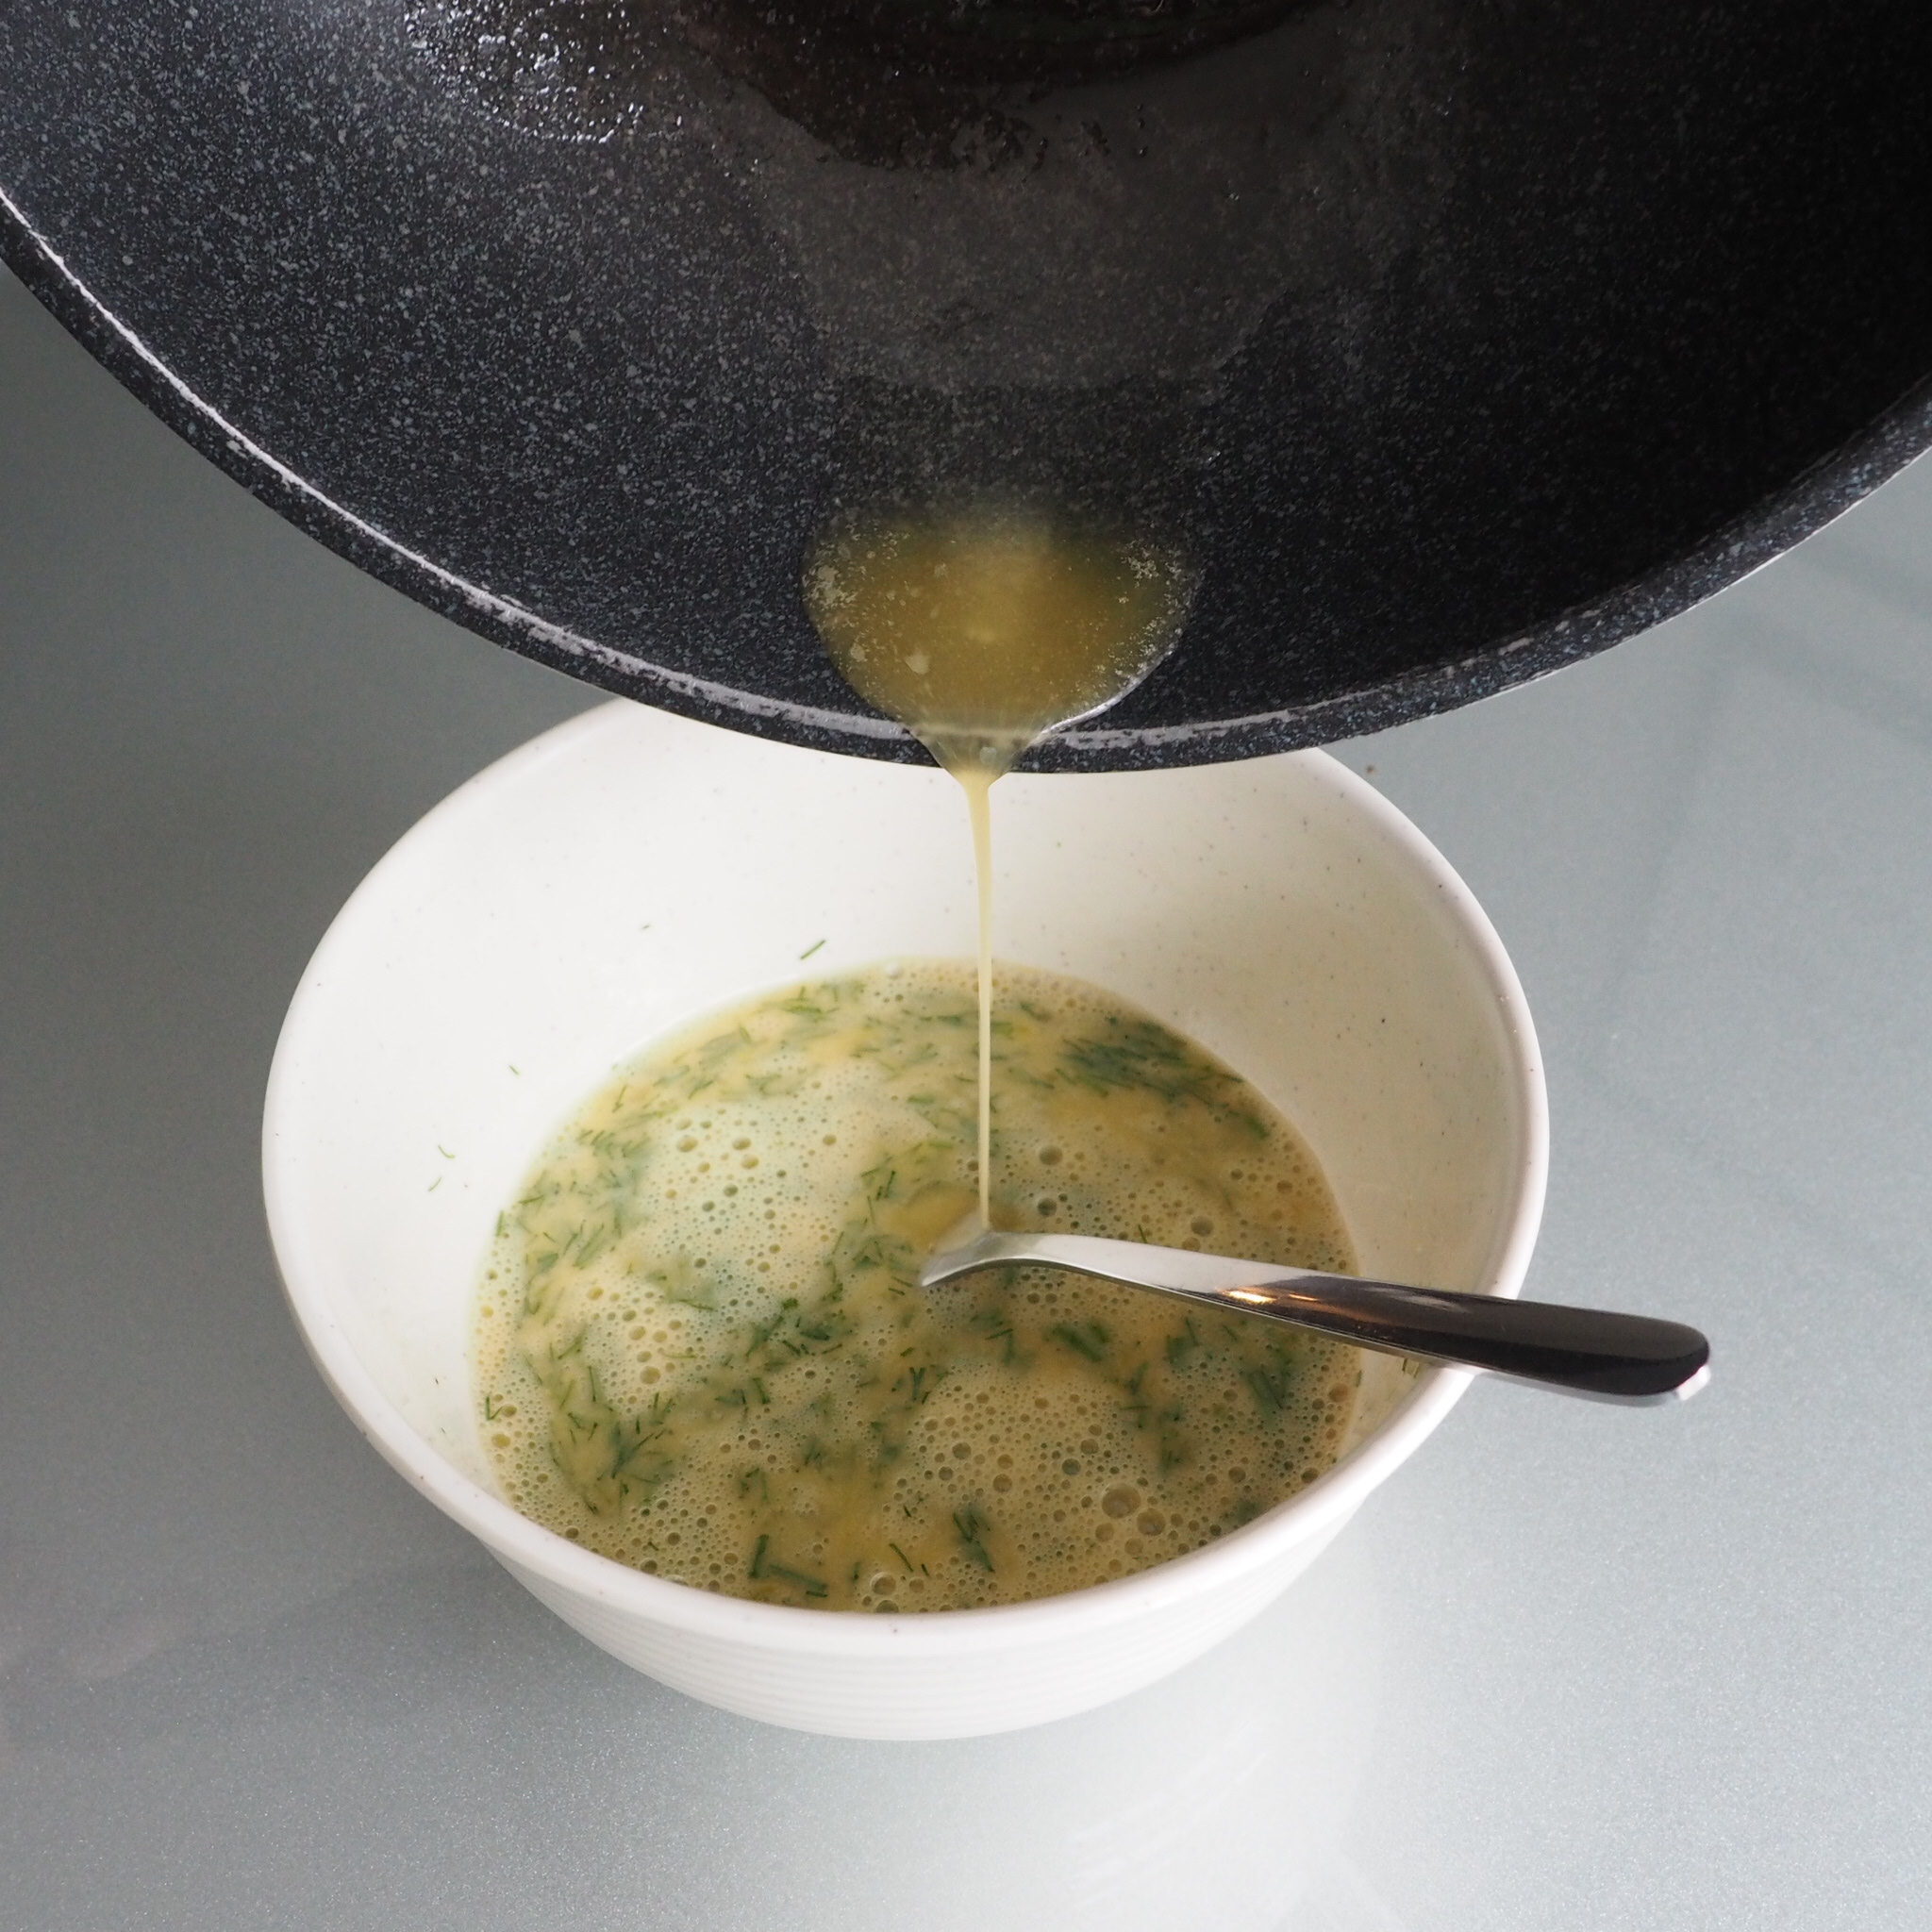  Step 2: Add in 1 tsp of melted vegan butter or oil into your scrambled eggs 